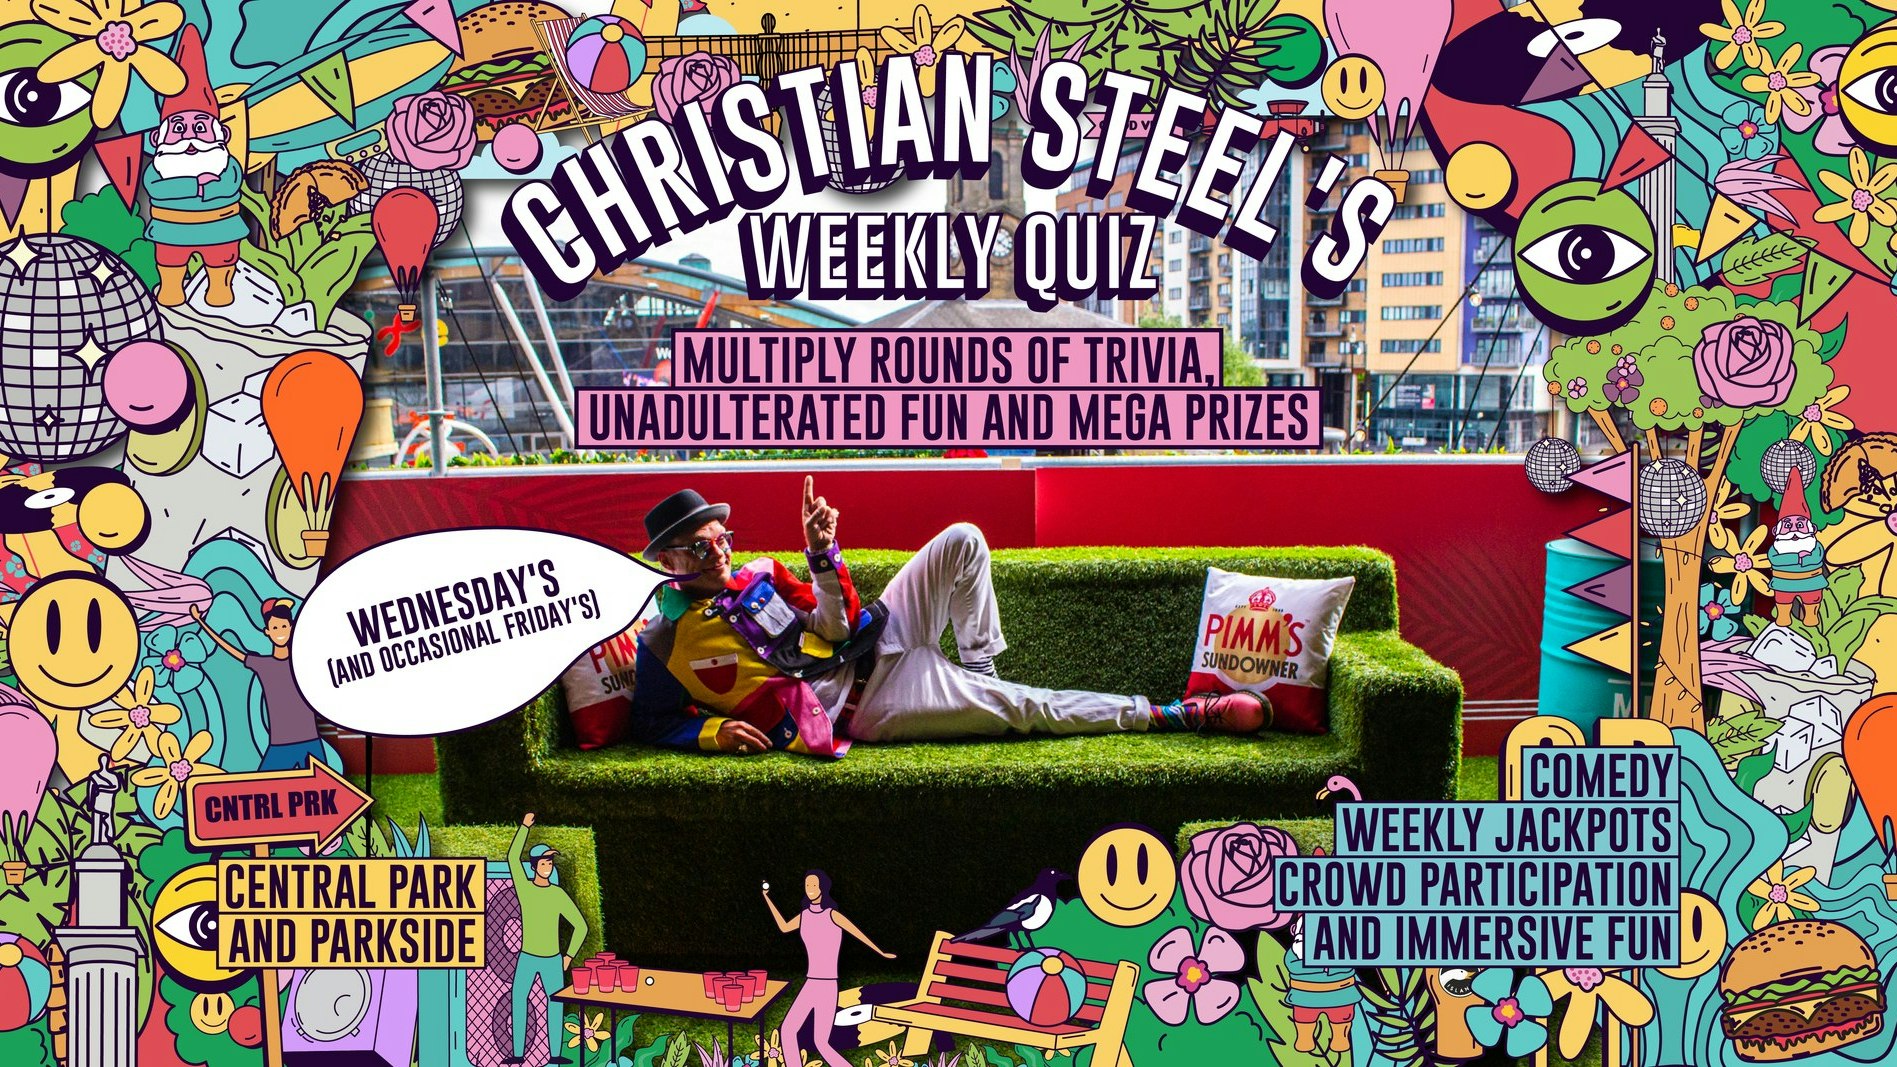 Christian Steel’s Weekly Quiz at Central Park!